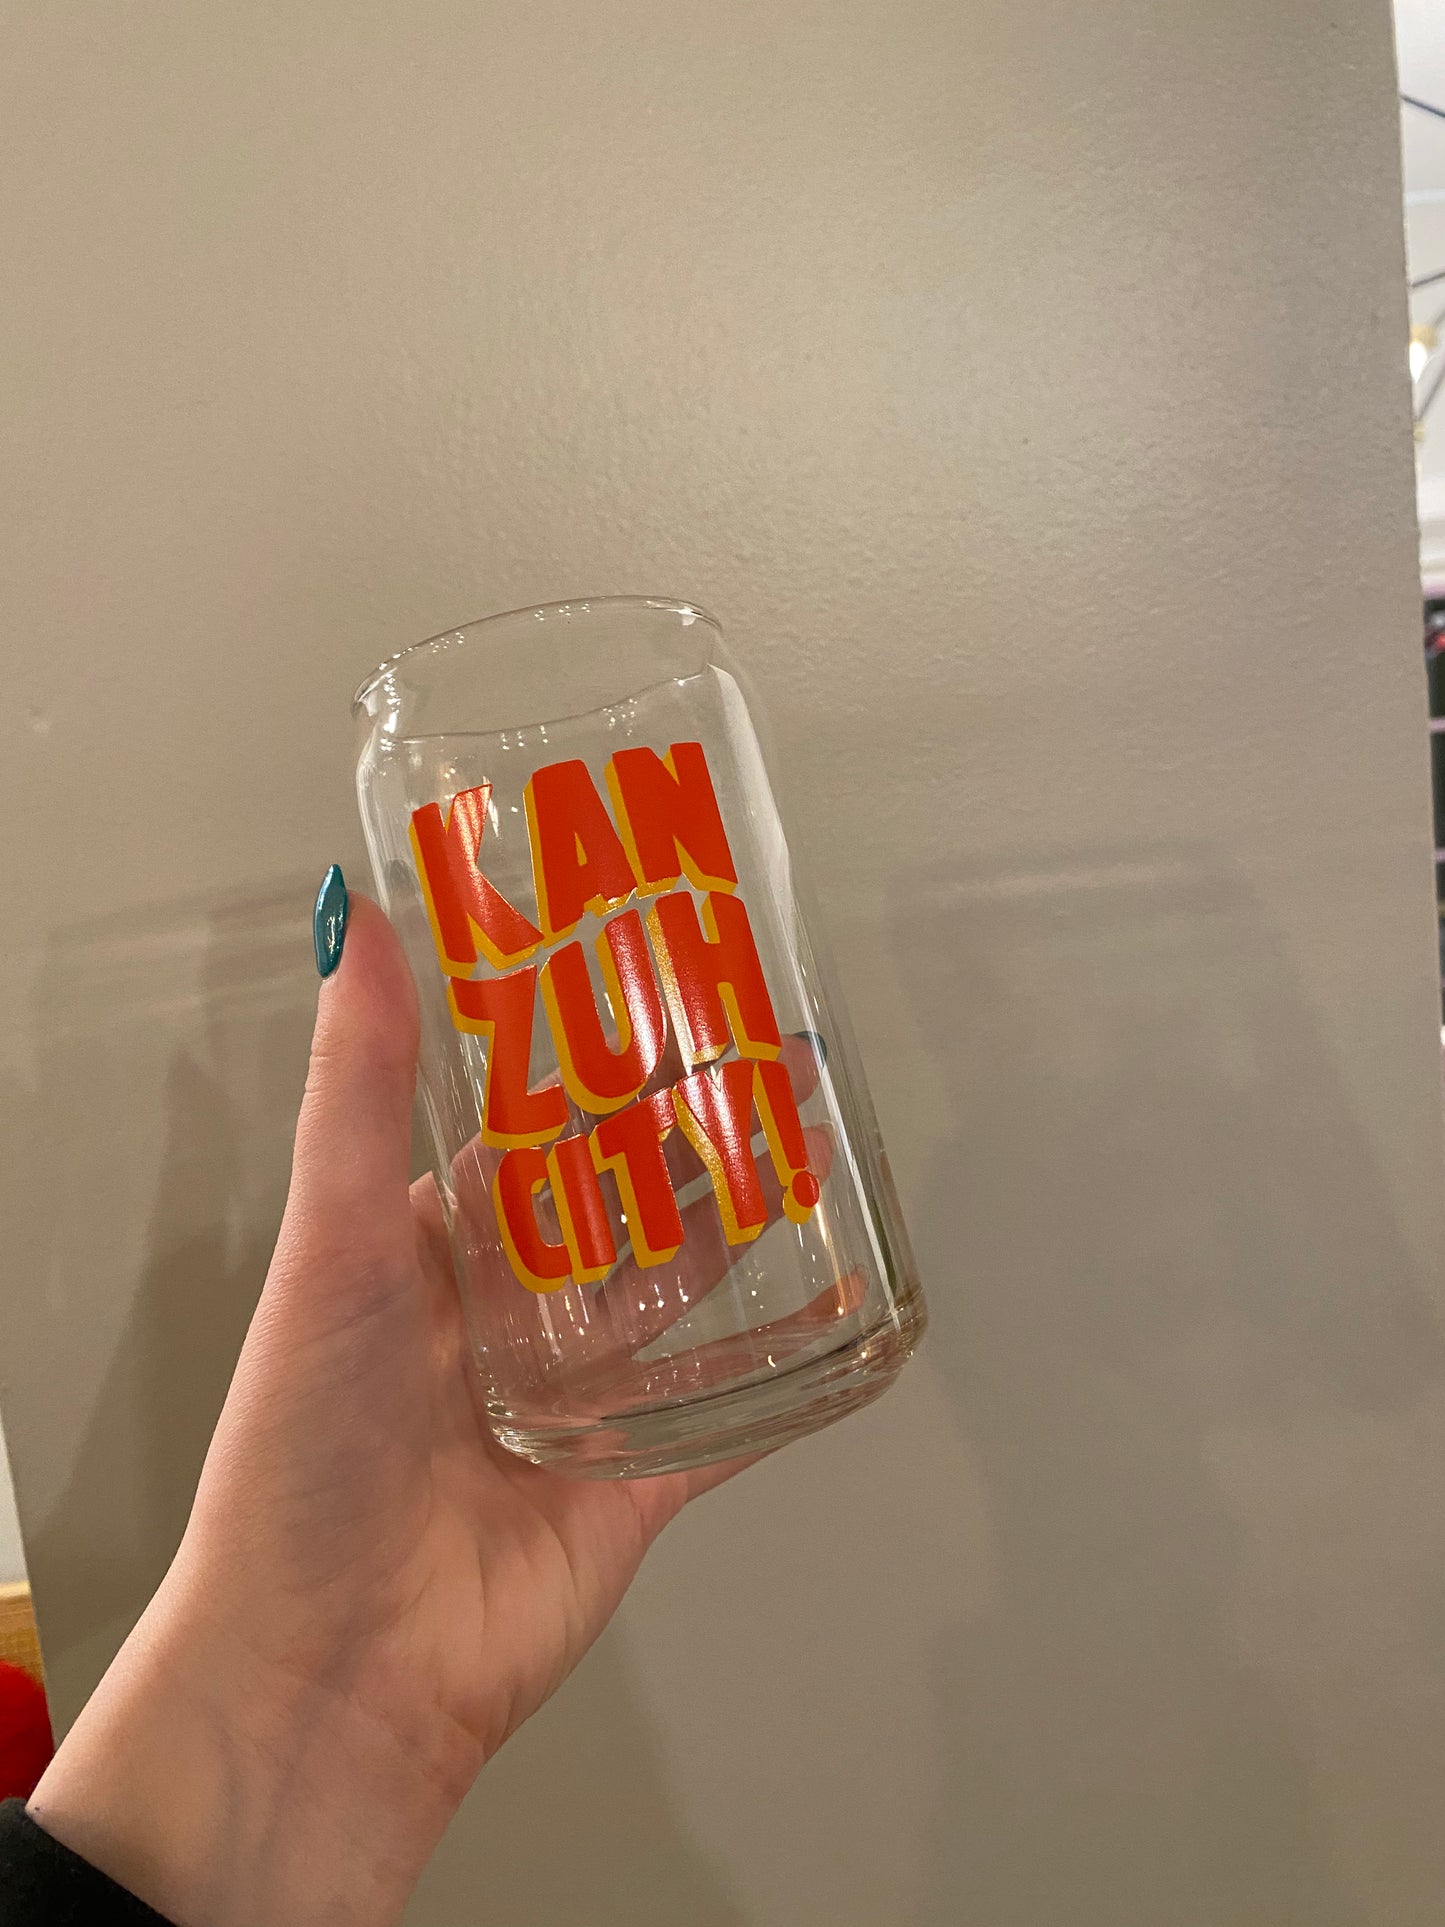 Load image into Gallery viewer, Kan Zuh City Beer Can Glass
